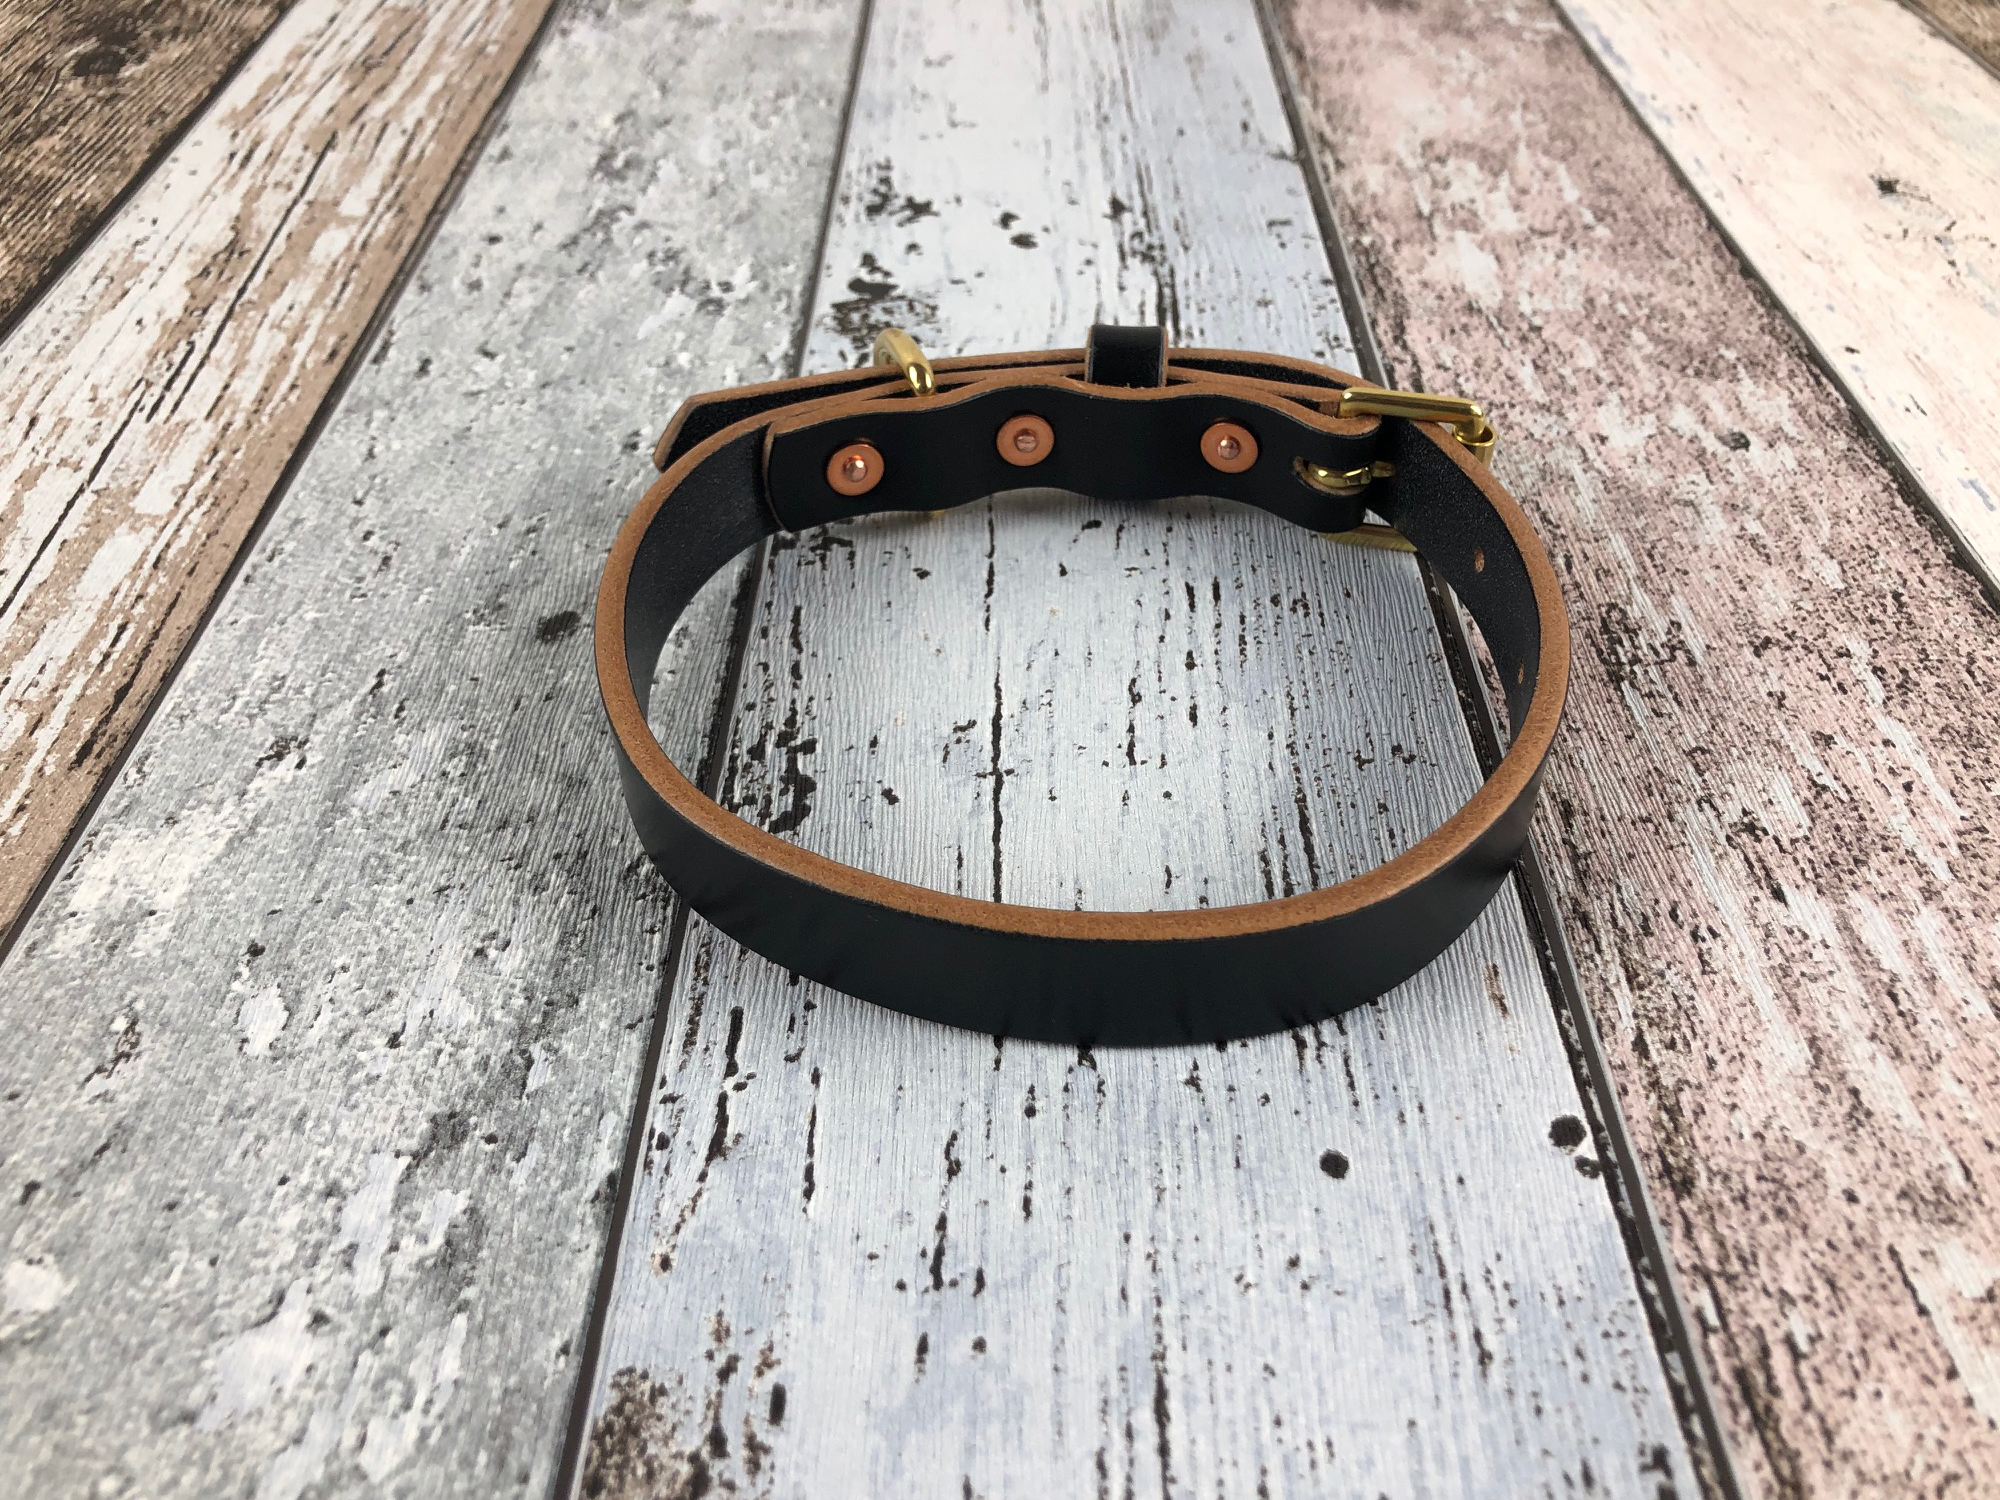 Leather Do gCollar showing Copper Rivets